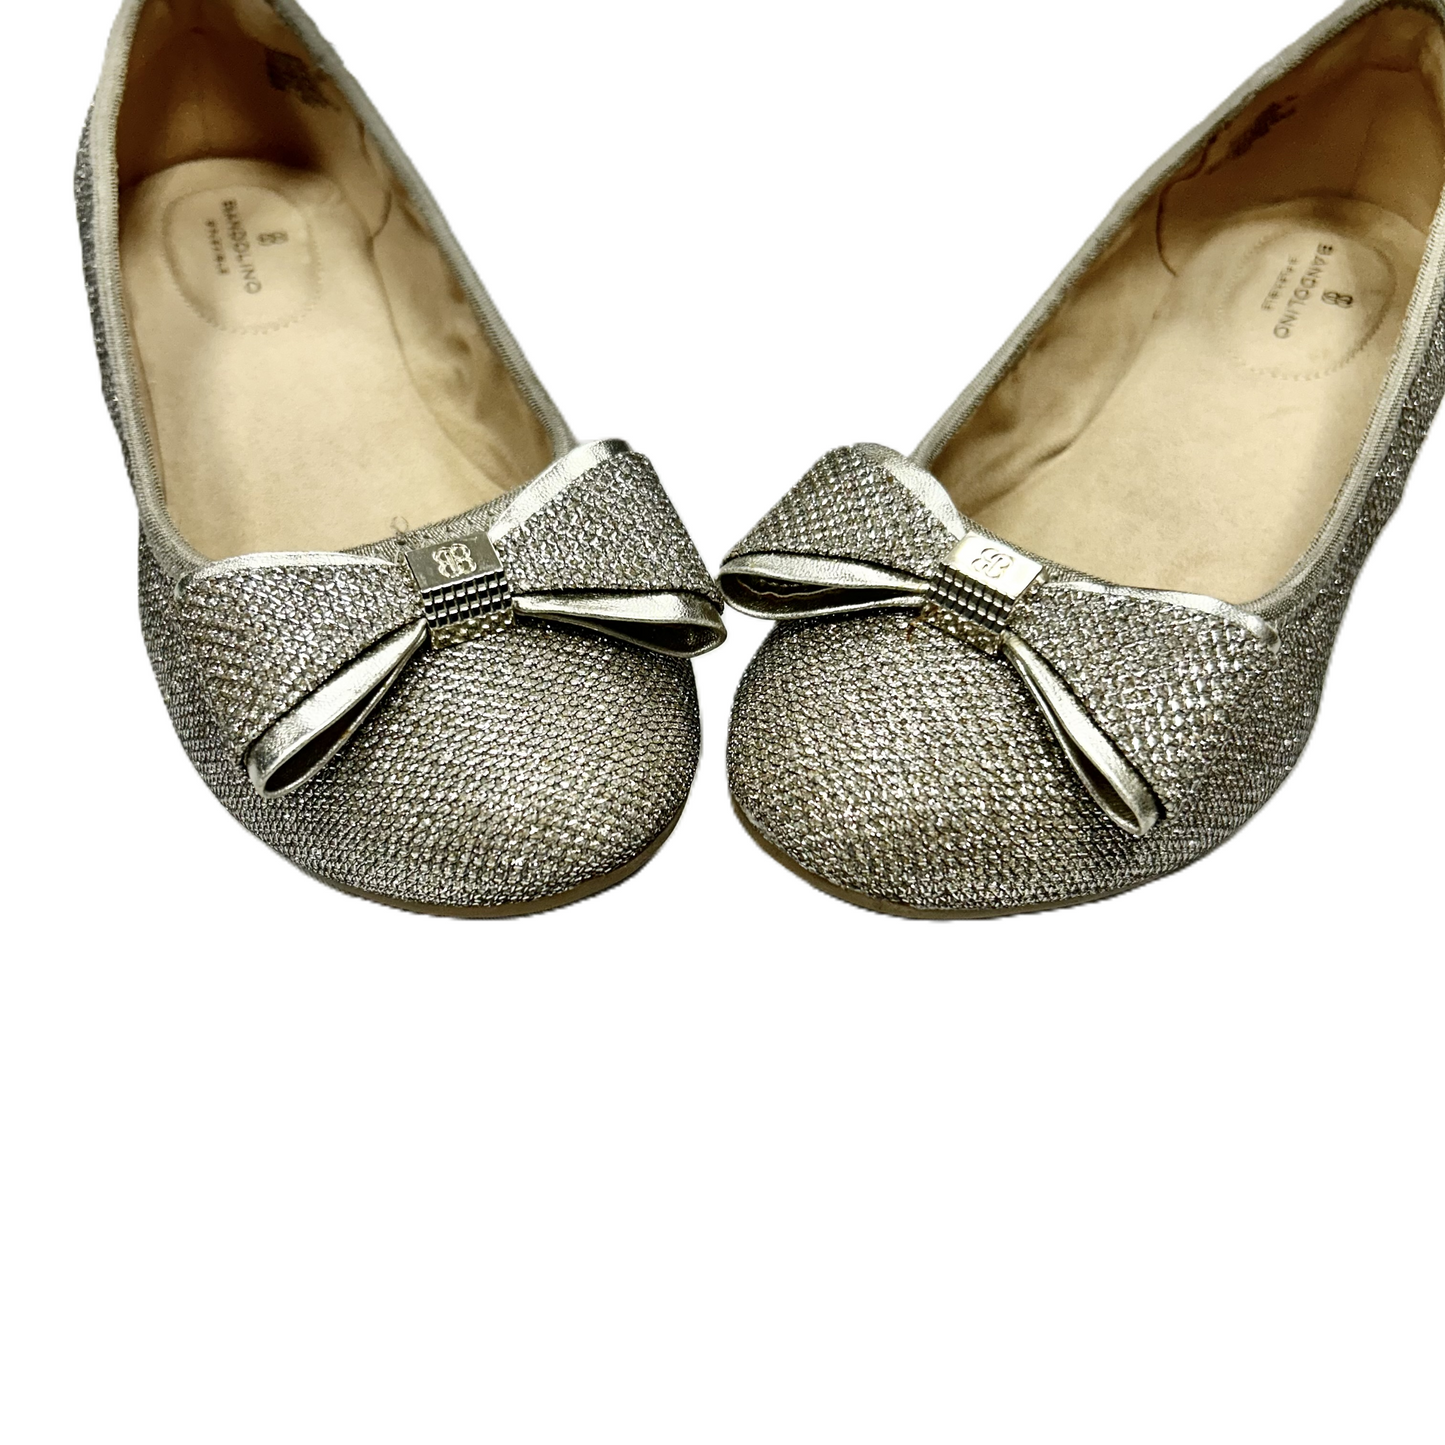 Gold Shoes Flats By Bandolino, Size: 8